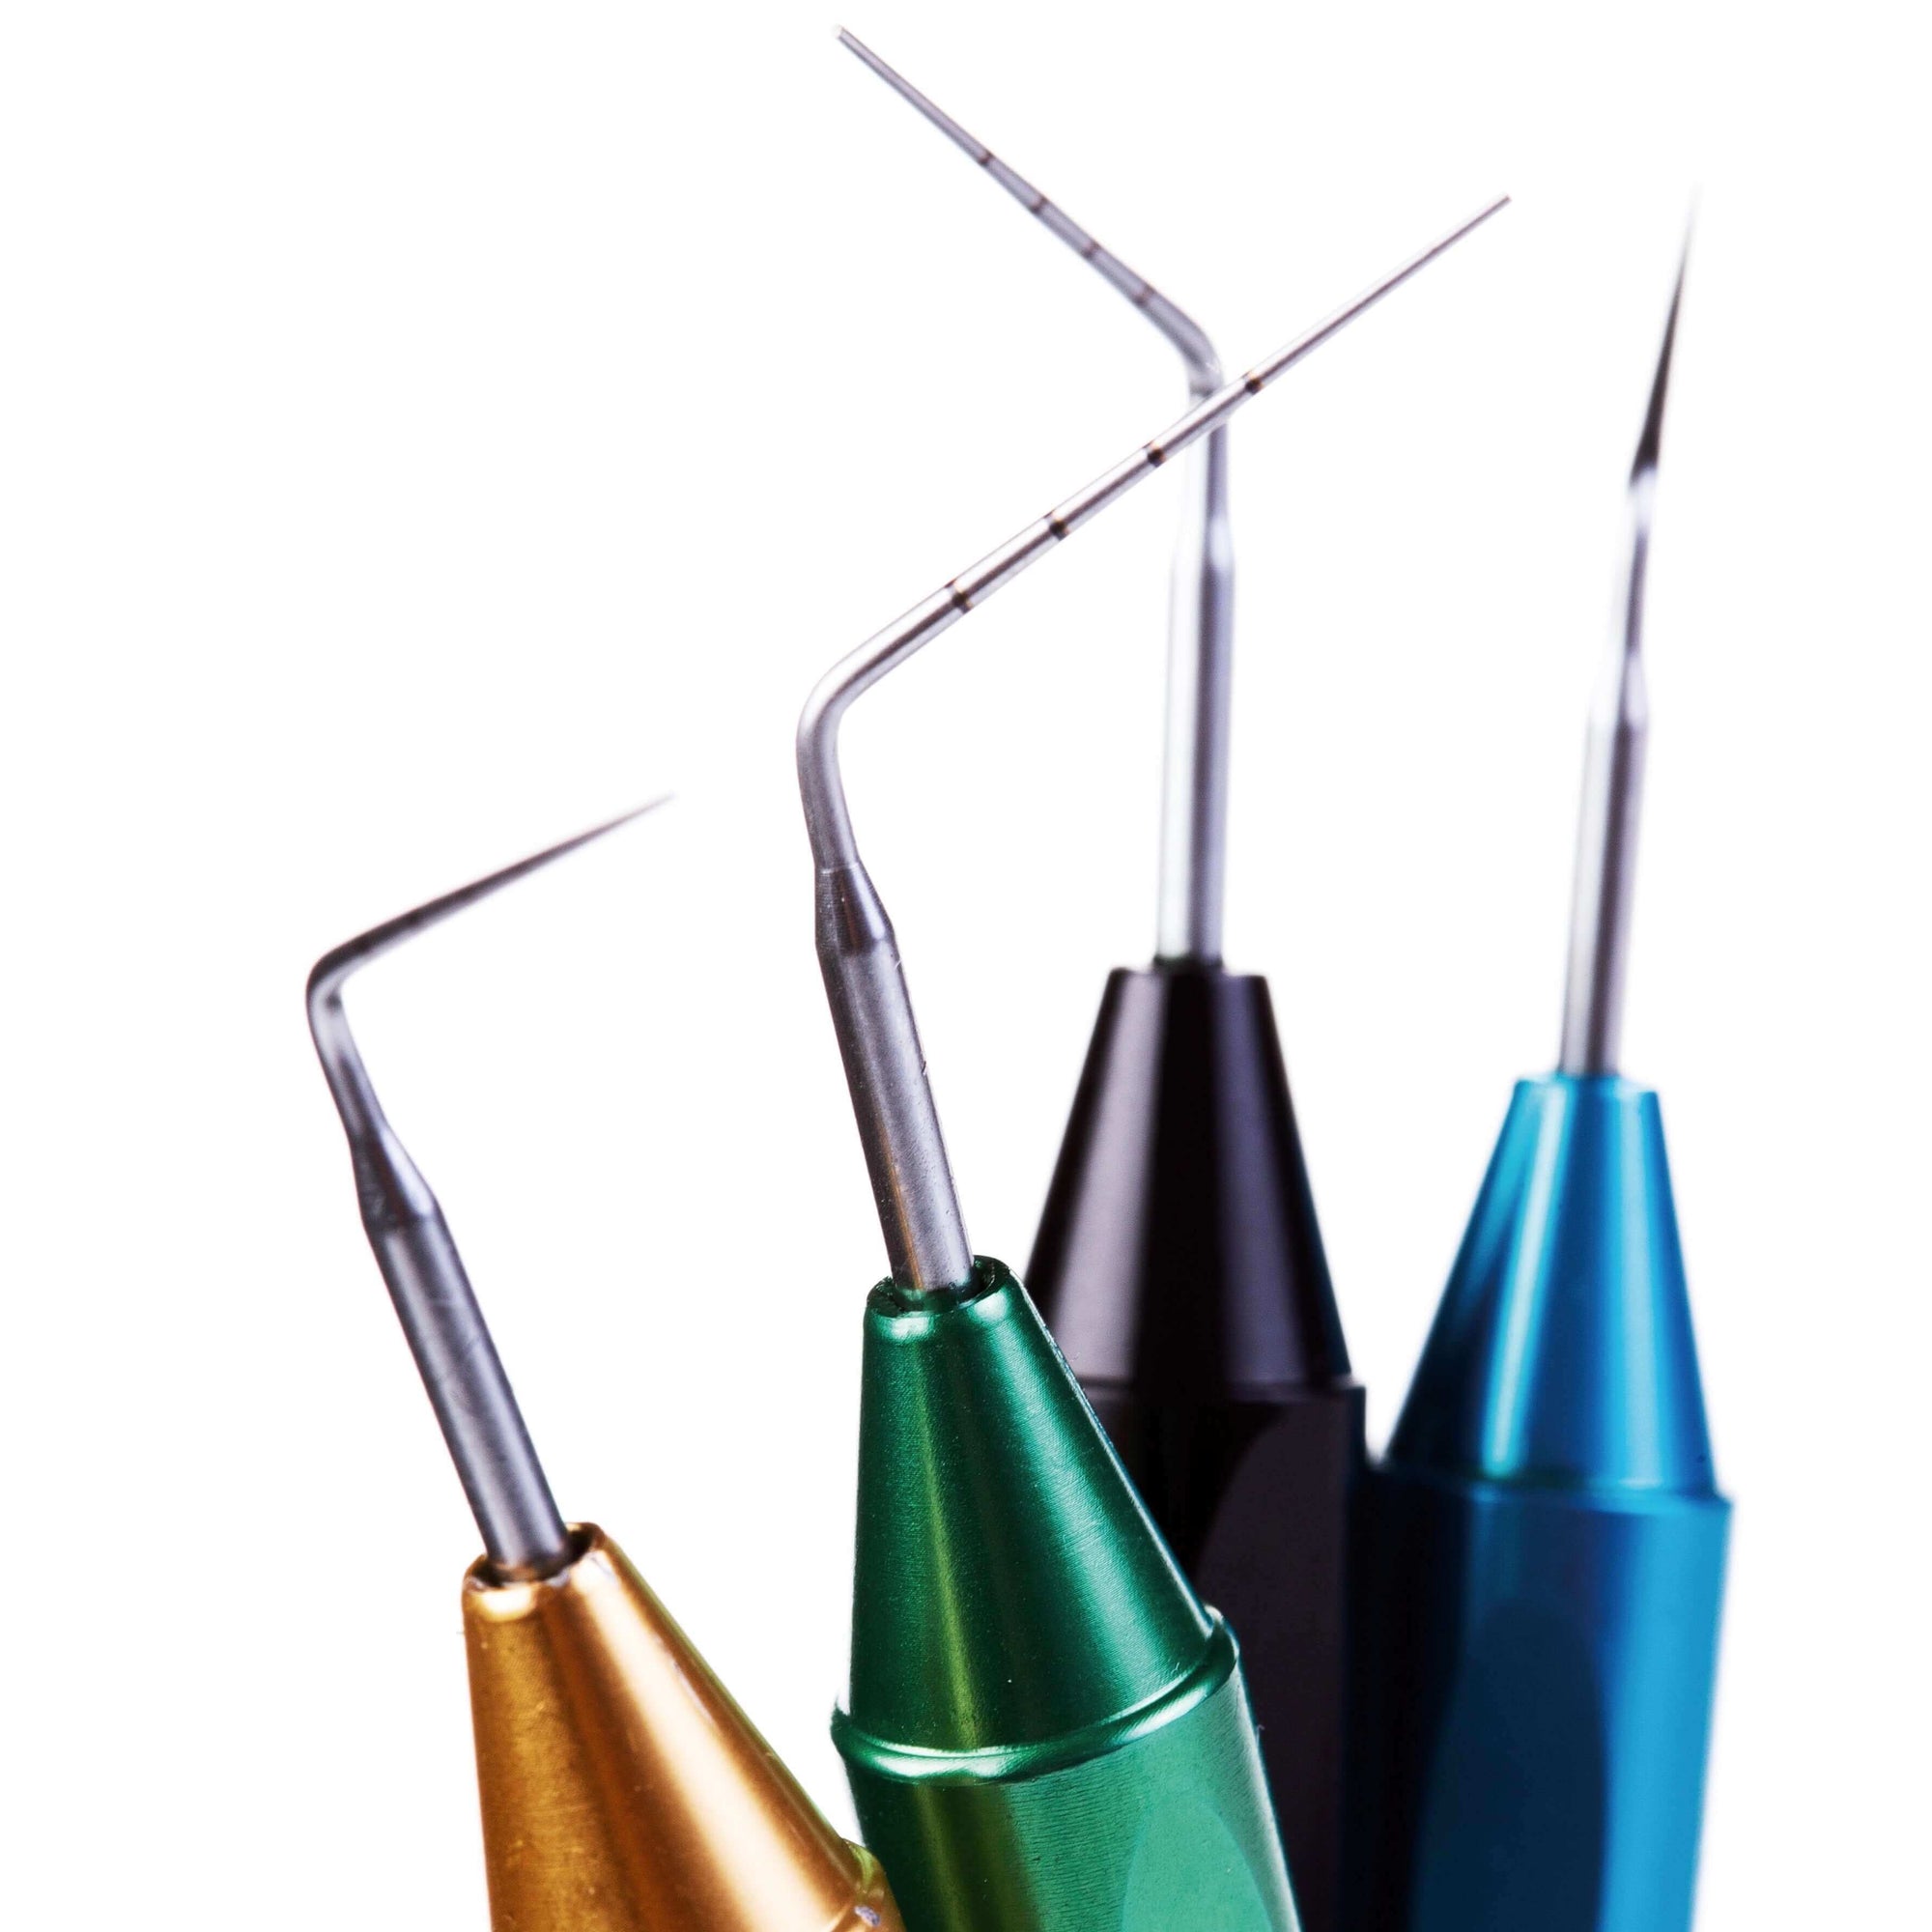 ZPlugger Designed for use in both curved root canals and in the coronal and middle third of the root canal. The NiTi end has gauges ranging from 35 to 60. The steel end has gauges ranging from 70 to 120.